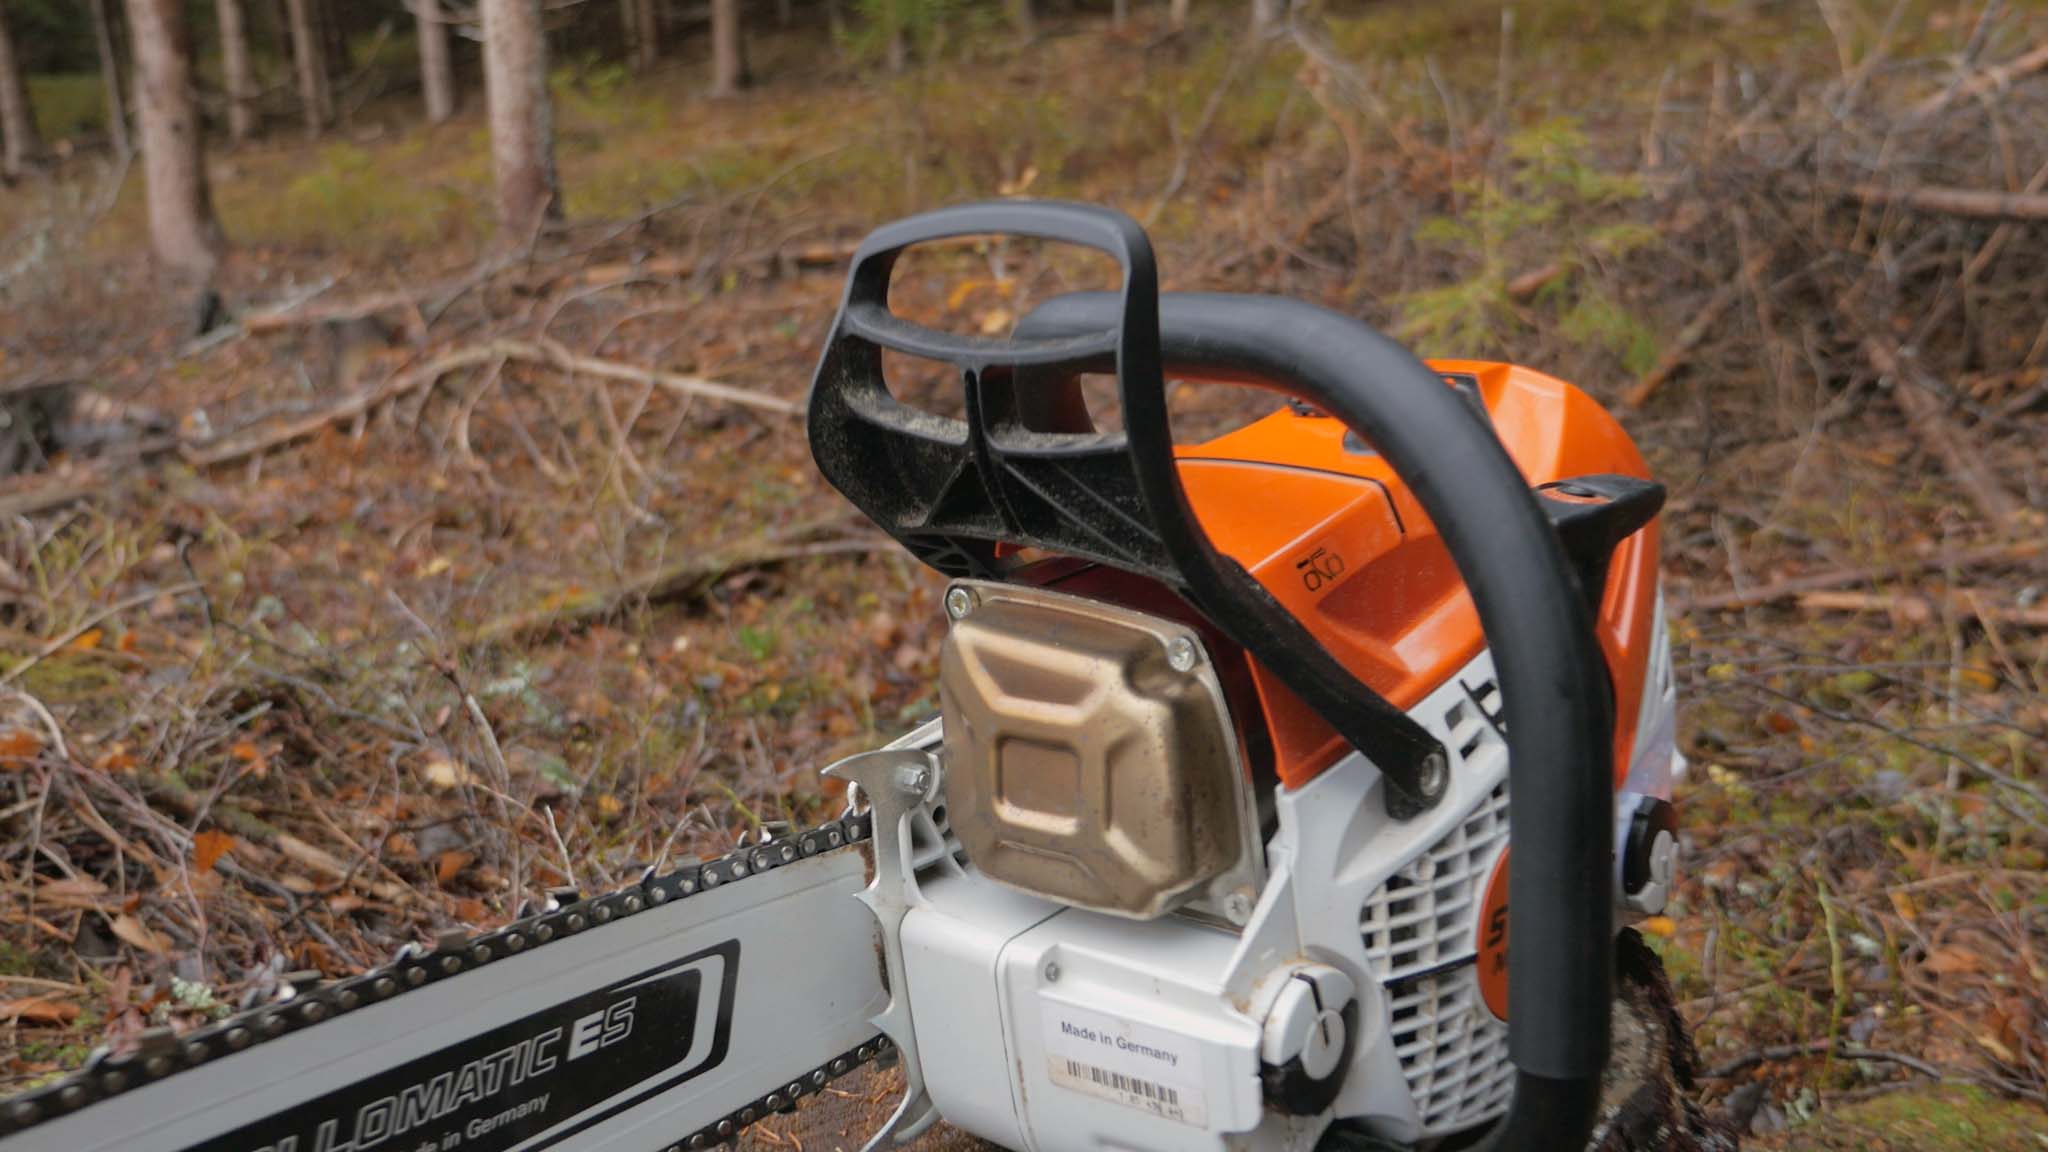 STIHL 500i - In A League of It's Own! (First Electronically Fuel Injected  Chainsaw!) 